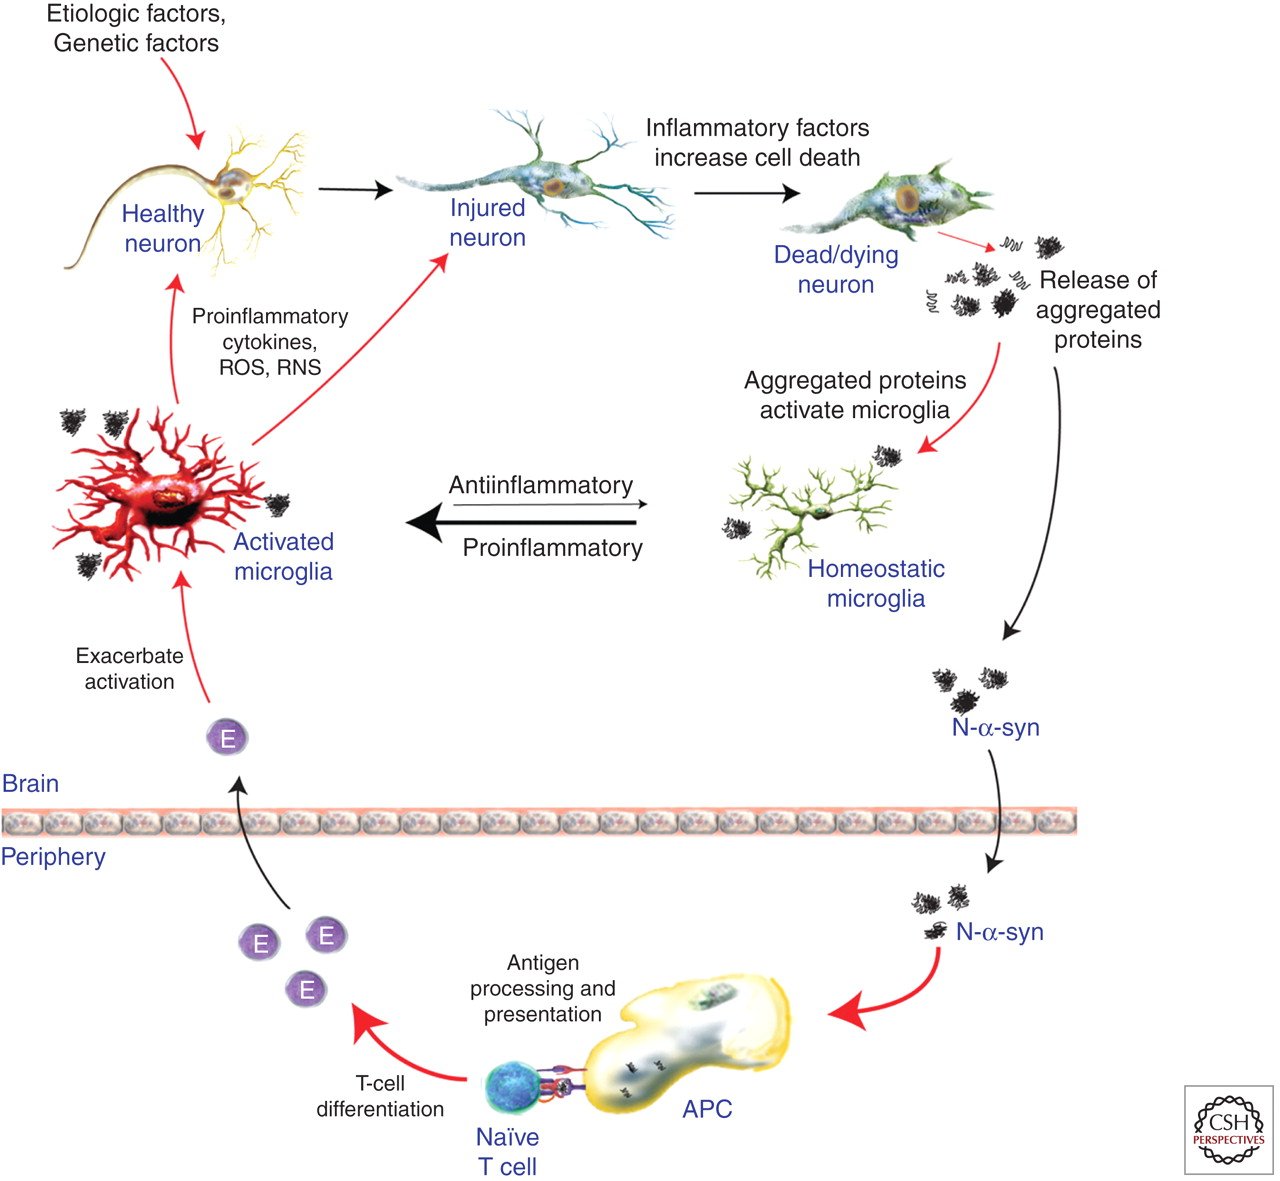 Inflammation and Adaptive Immunity in Parkinson’s Disease